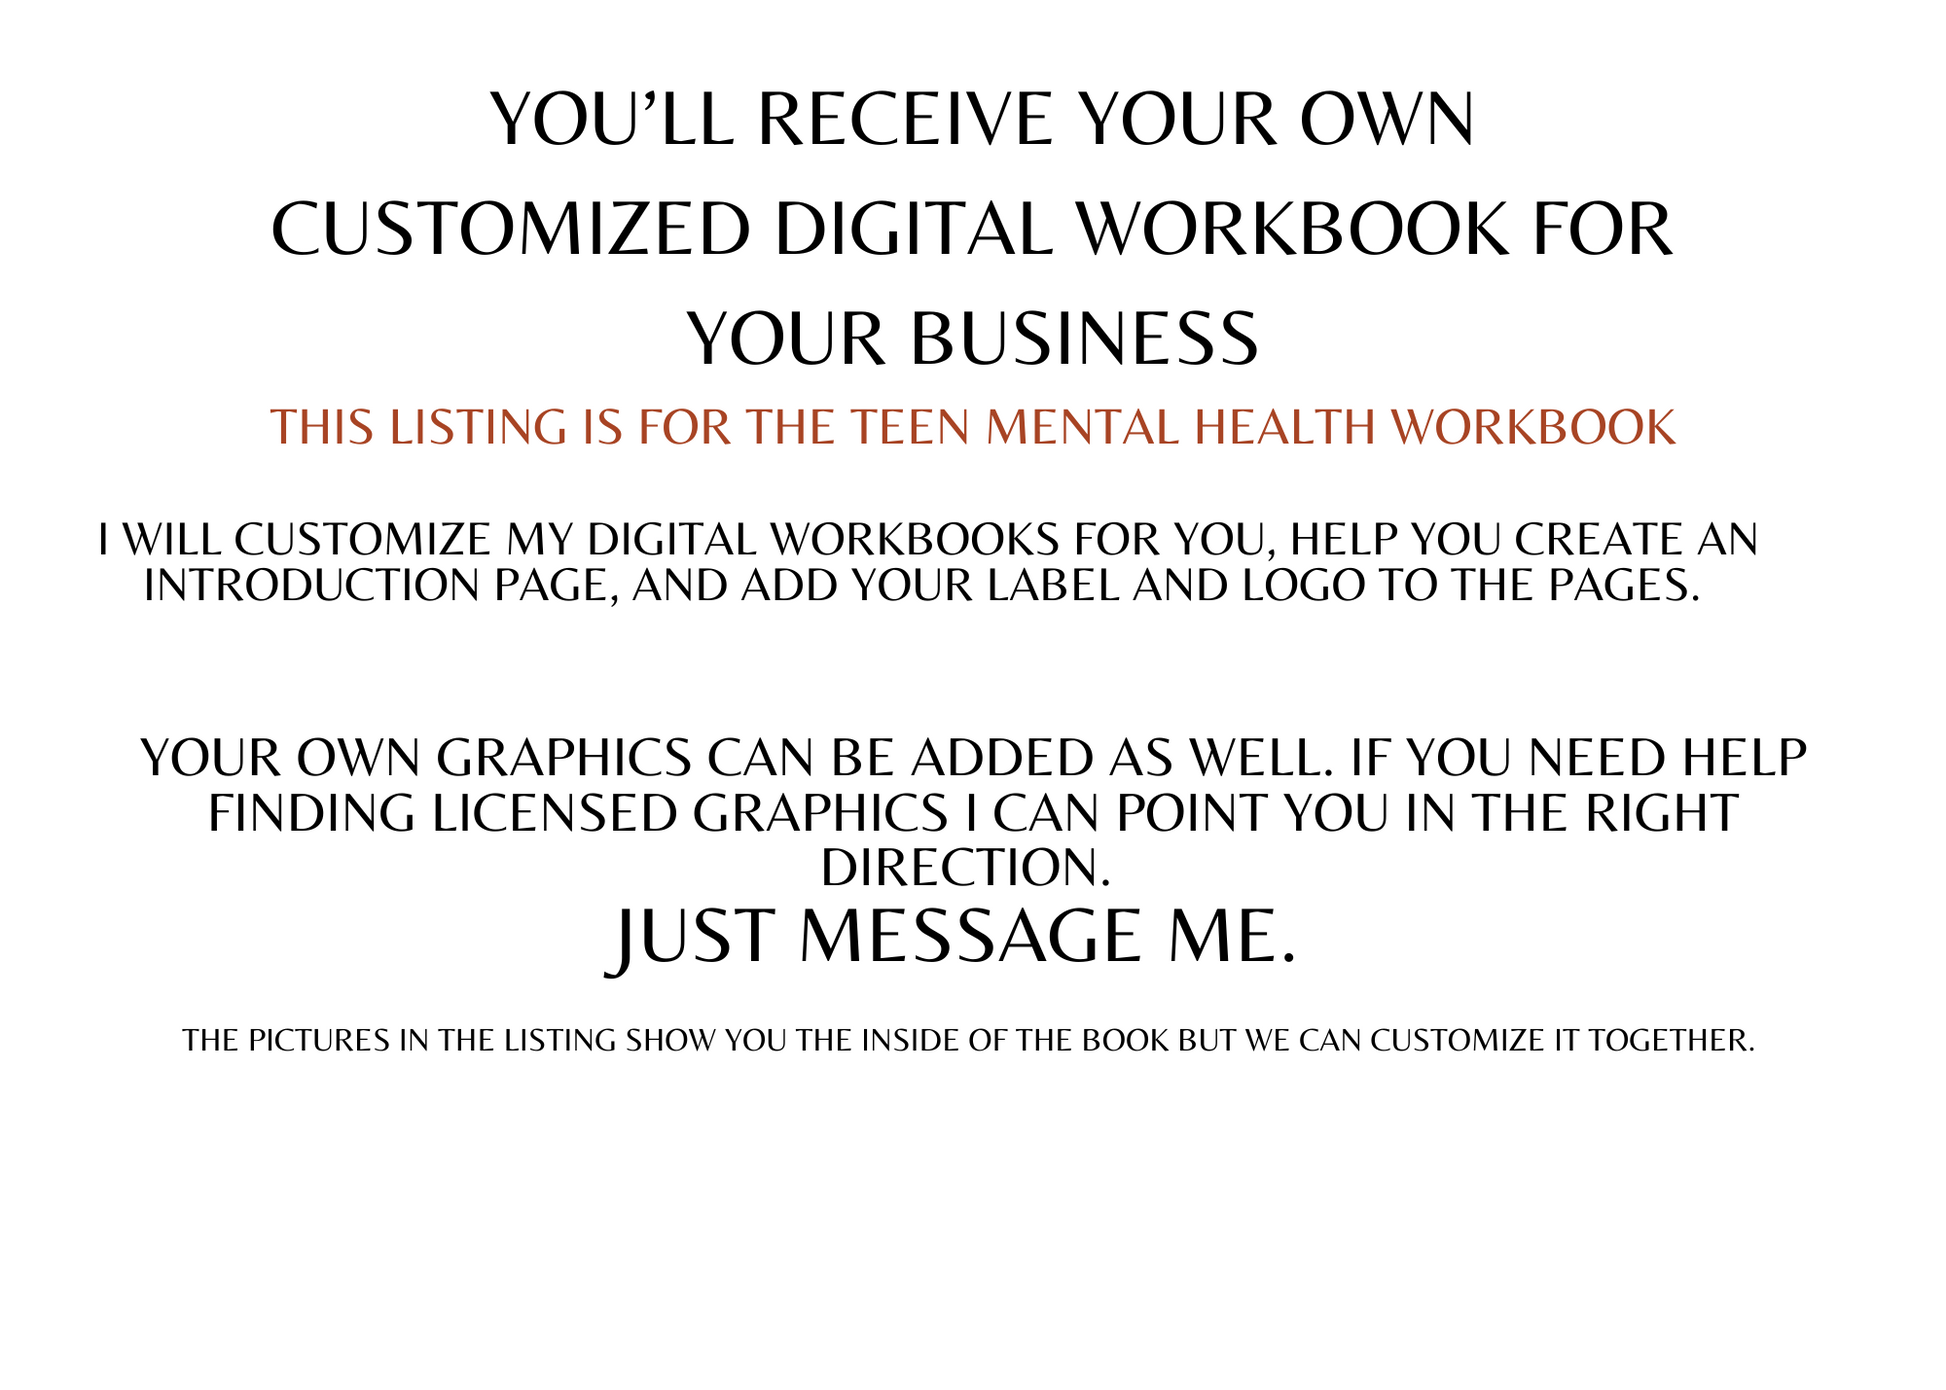 Custom Digital Self Worth Workbook- For Goodnotes,- Full Customization For Your Business- Done For You Digital Product- PLR Custom Projects